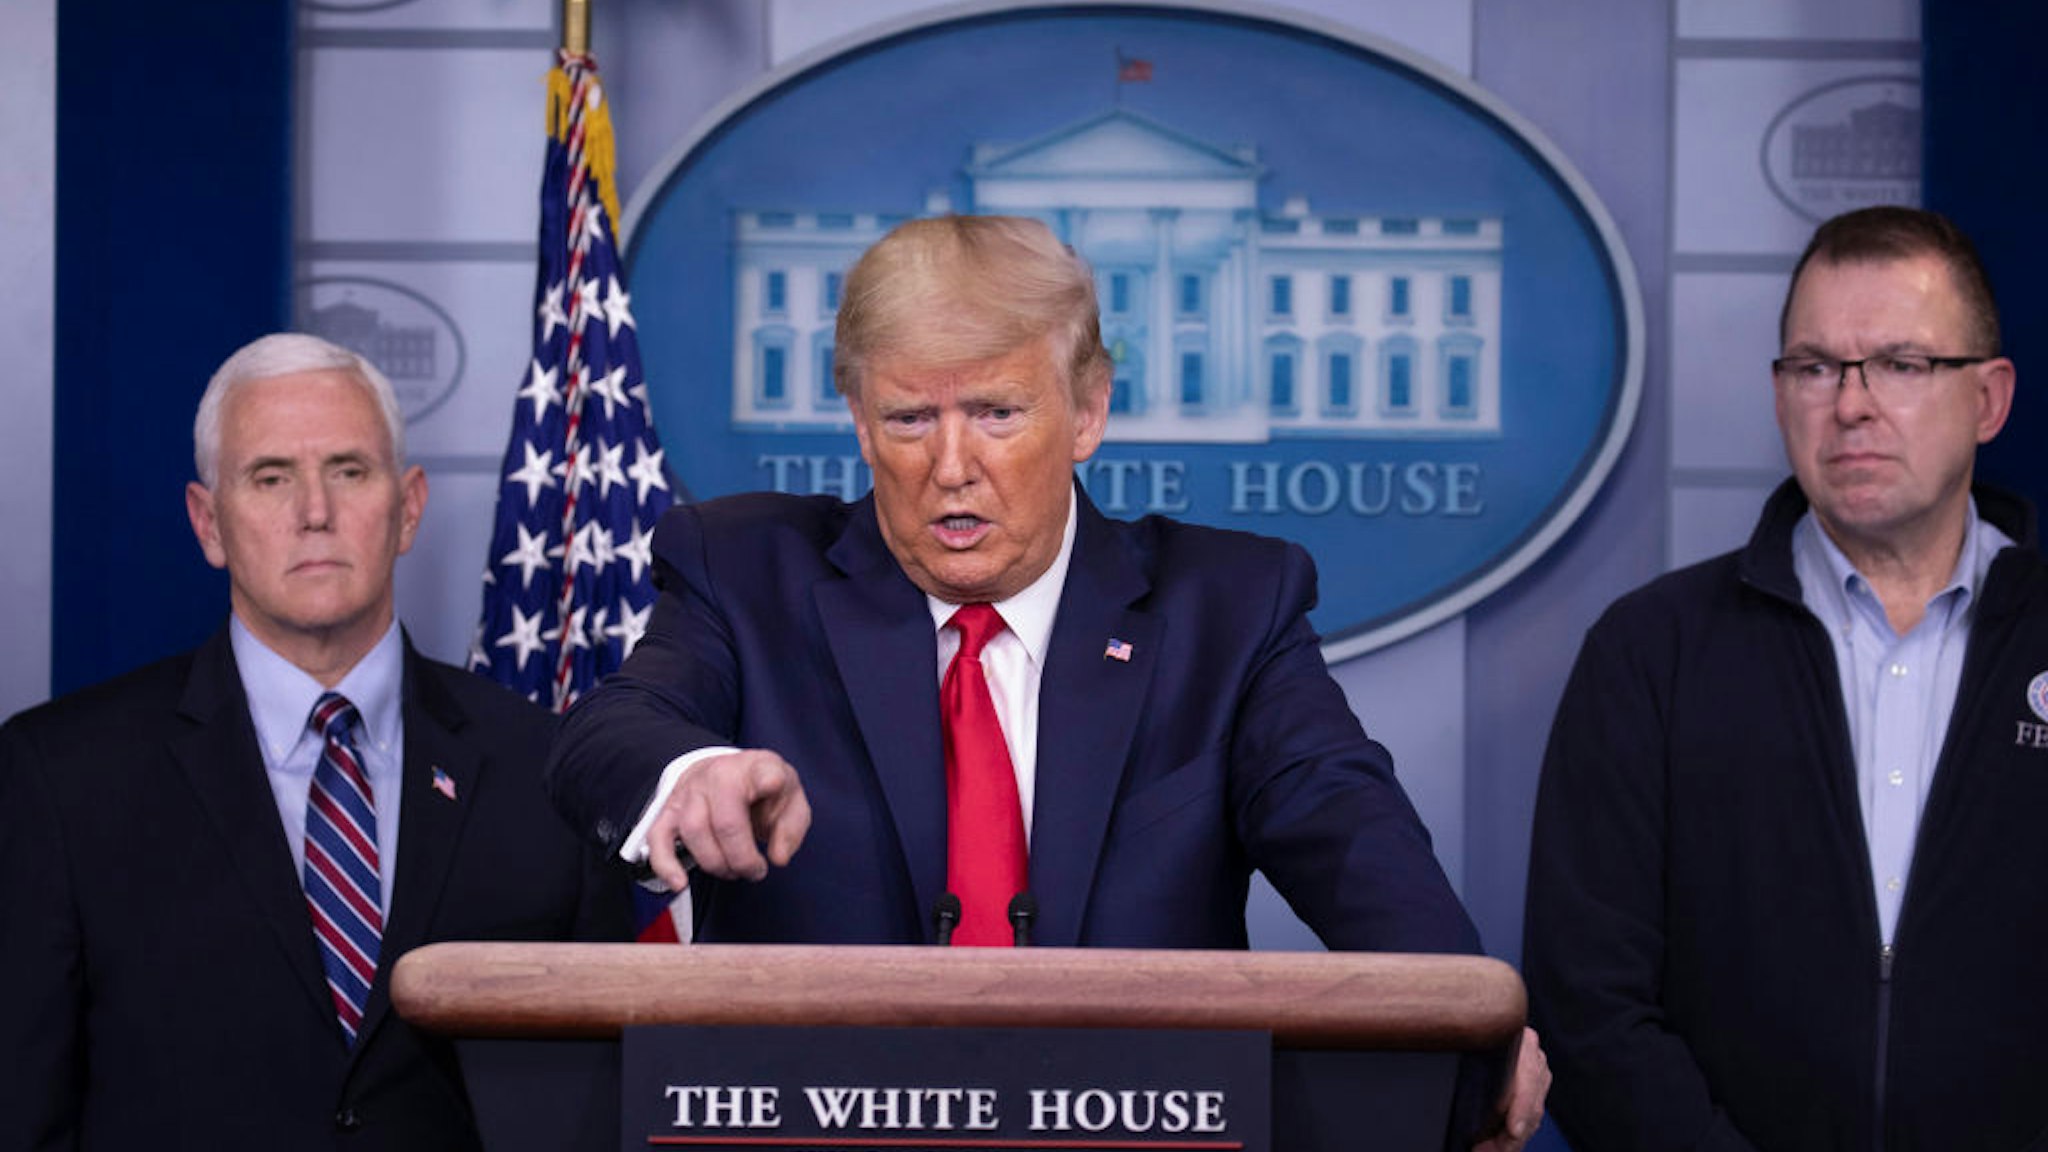 U.S. President Donald Trump speaks at the daily coronavirus briefing joined by Vice President Mike Pence and FEMA Administrator Peter Gaynor in the James Brady Press Briefing Room at the White House on March 22, 2020 in Washington, DC.